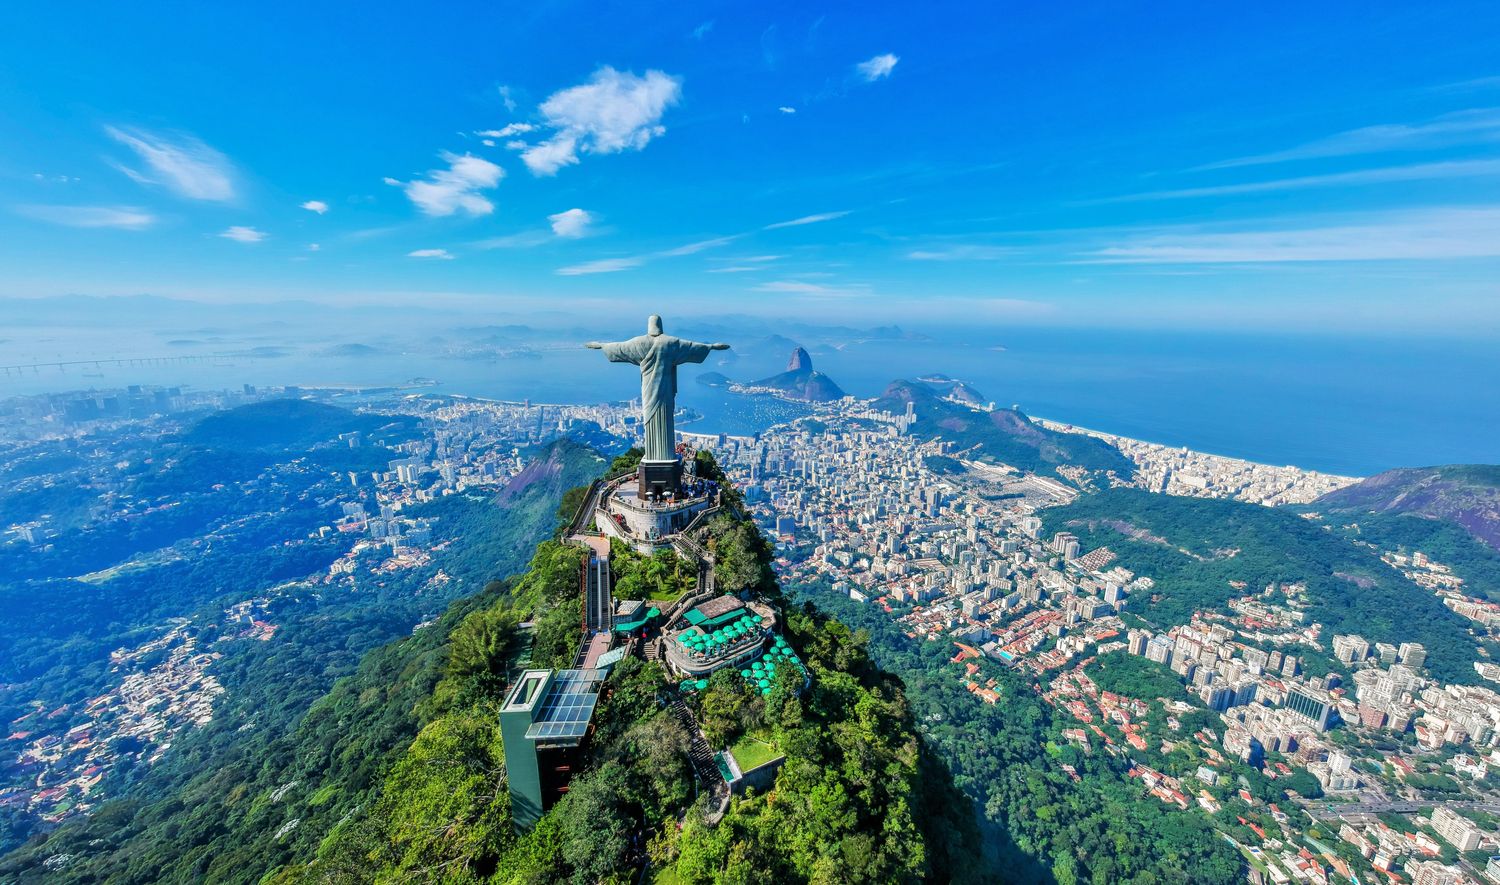 10 Things You Need To Know Before Going To Rio de Janeiro